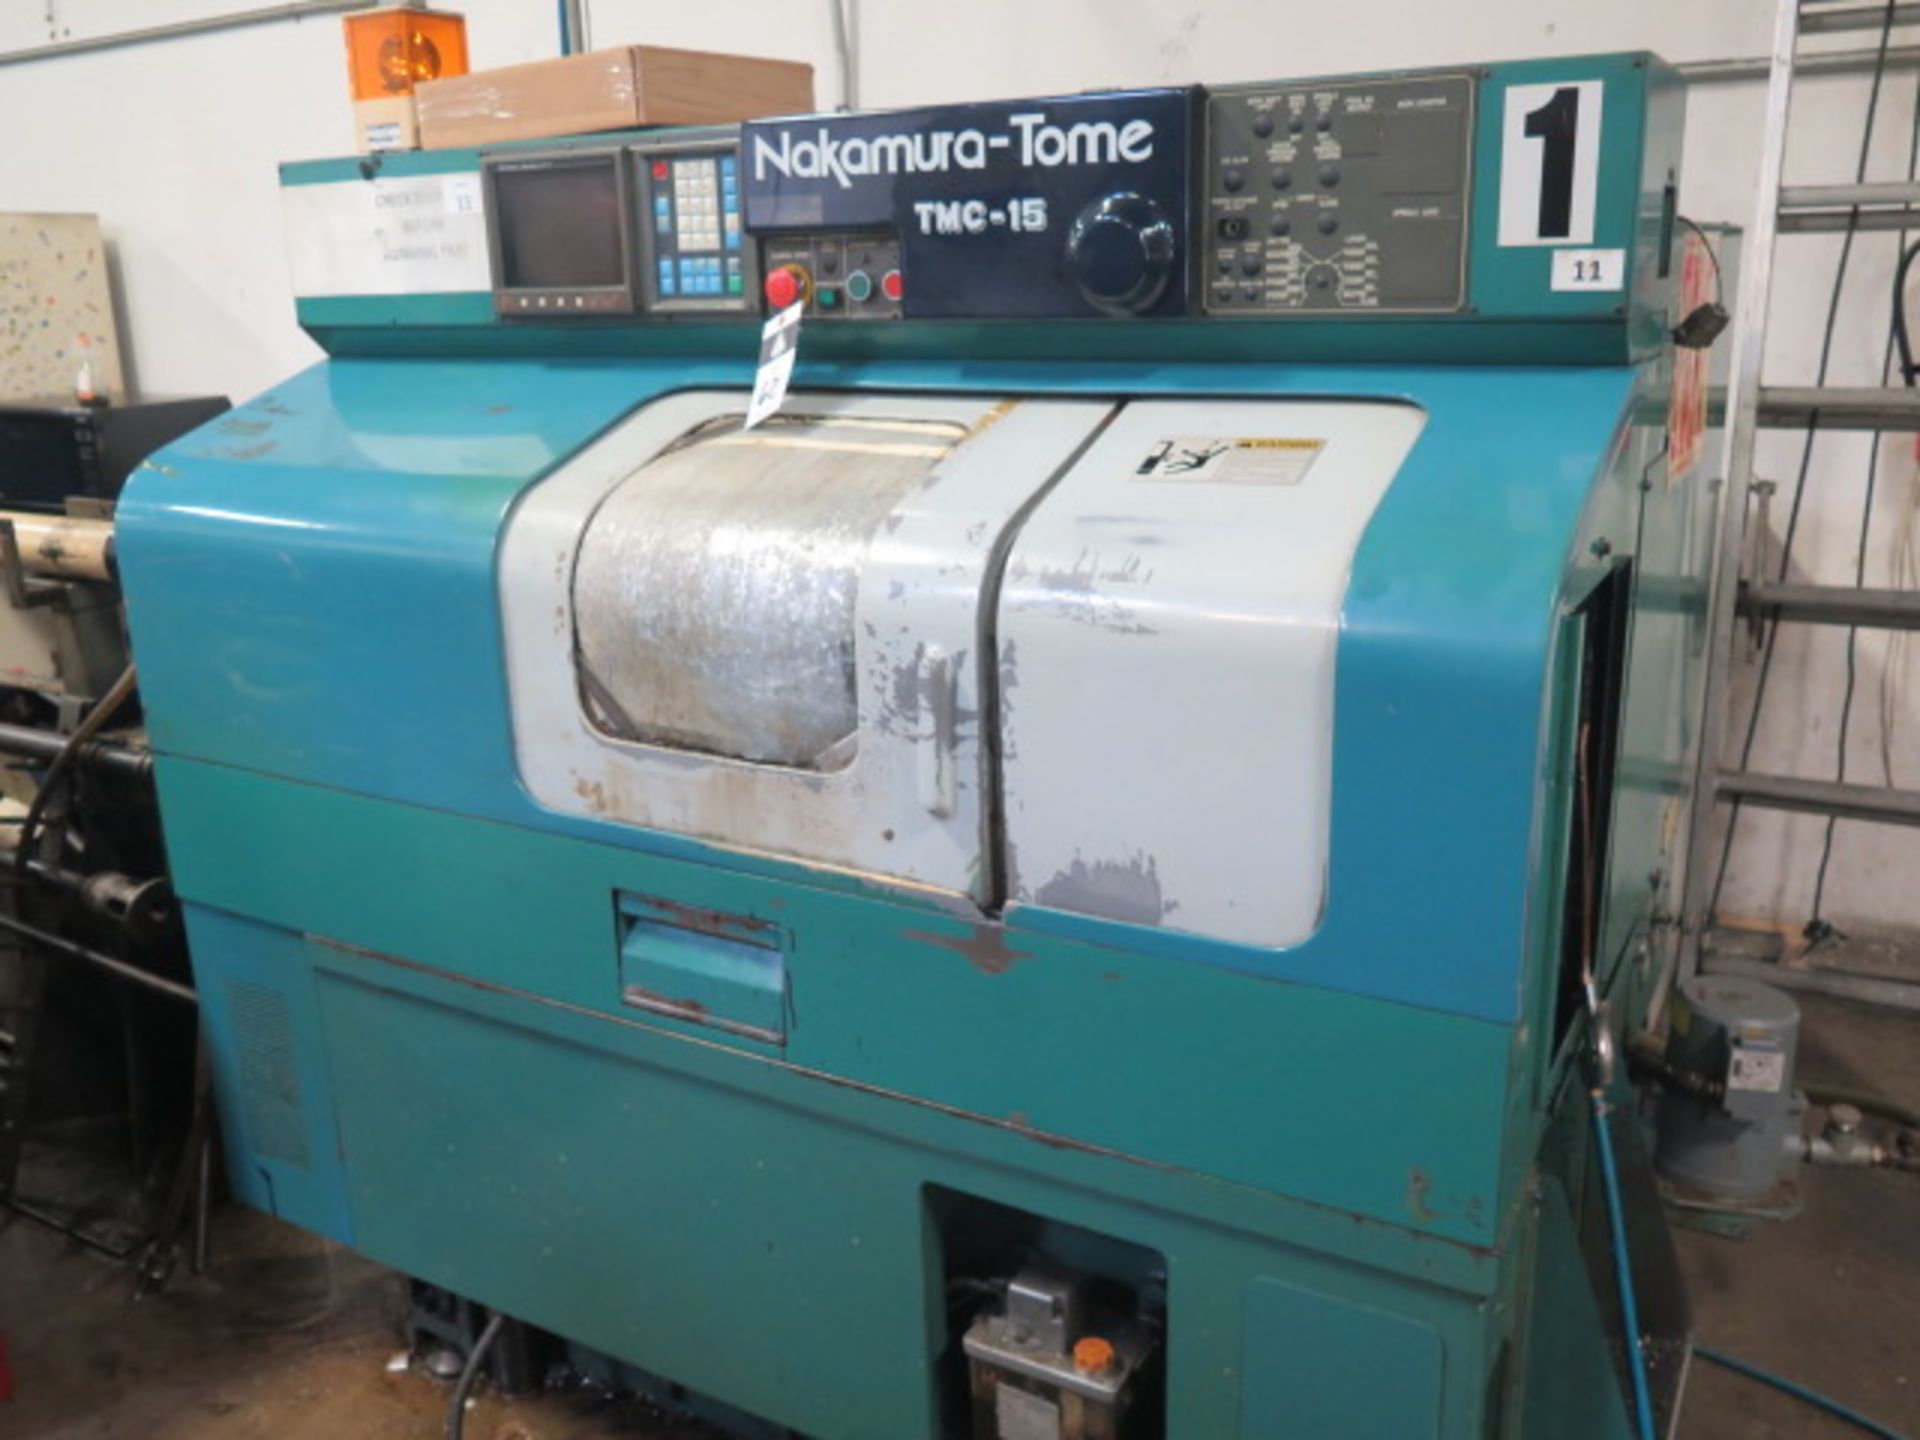 Nakamura Tome TMC-15 CNC Turning Center s/n E04101 w/ Fanuc Series 0-T Controls, SOLD AS IS - Image 2 of 13